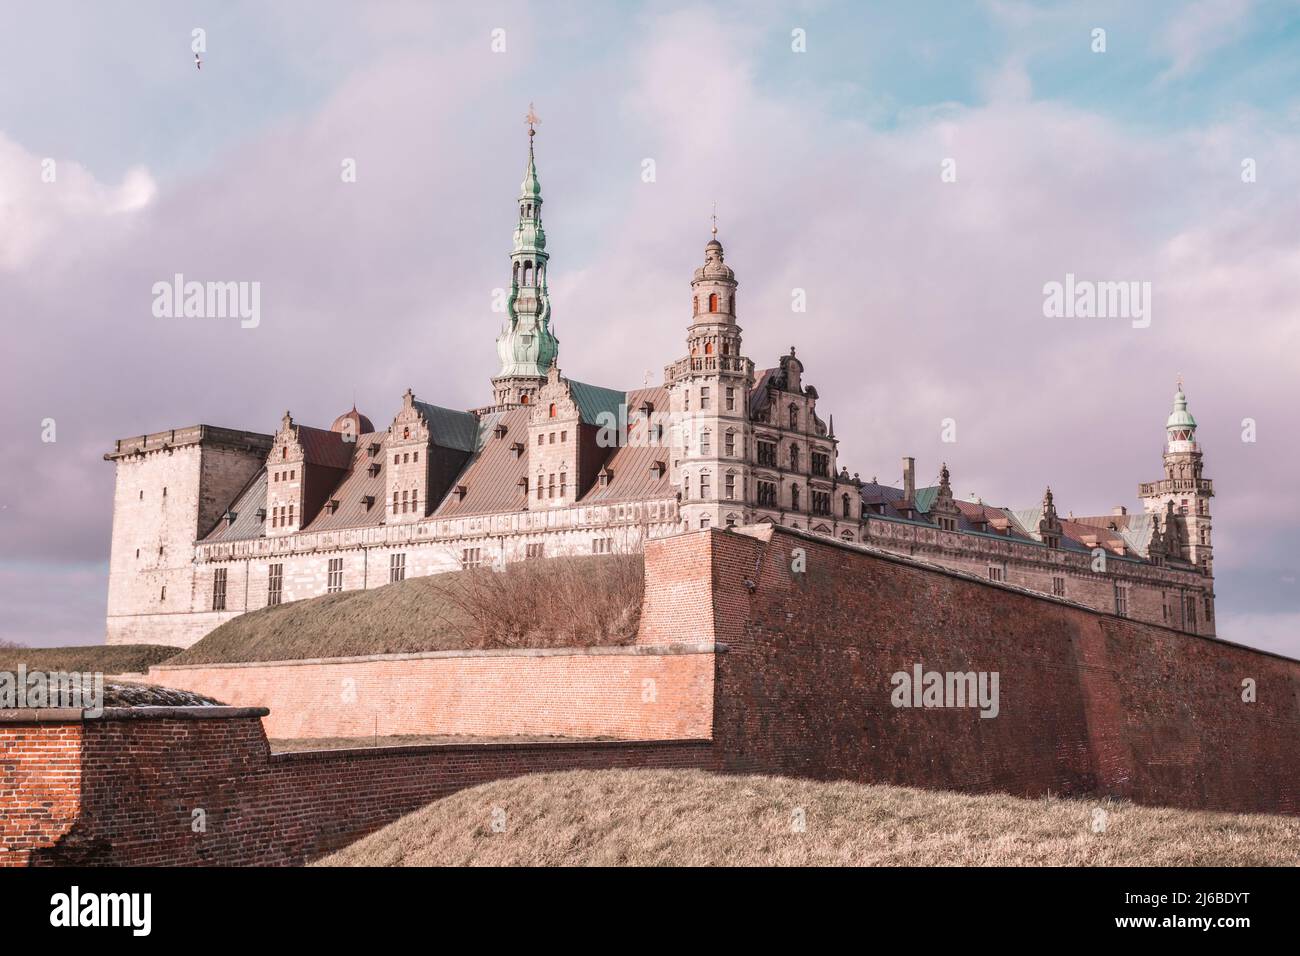 Kronborg Castle in Helsingor, Denmark. Kronborg is one of the most important Renaissance castles in Northern Europe and was inscribed on the UNESCO's Stock Photo